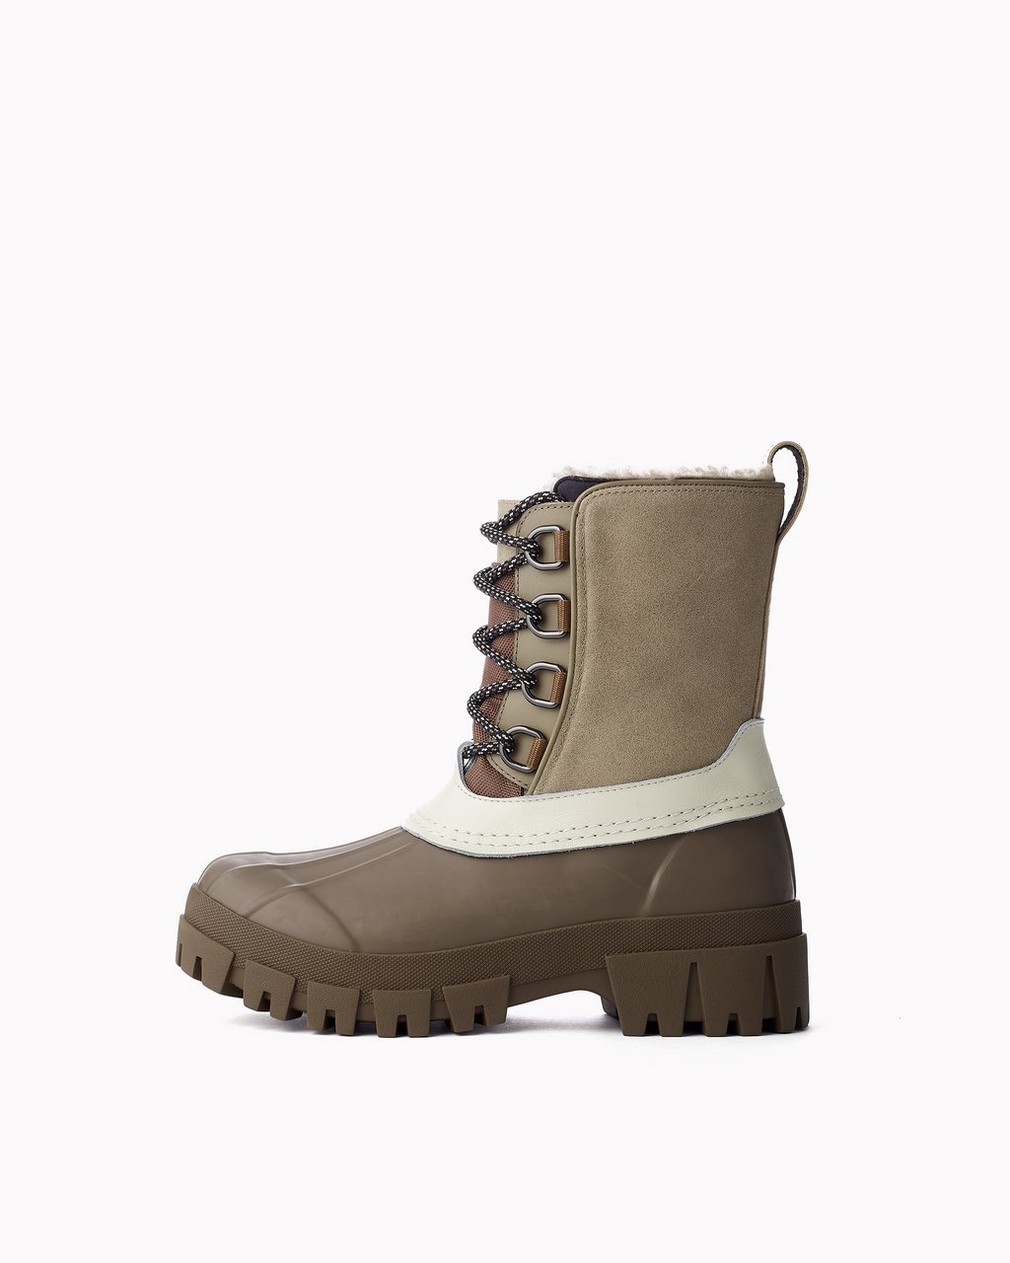 RB WINTER BOOT